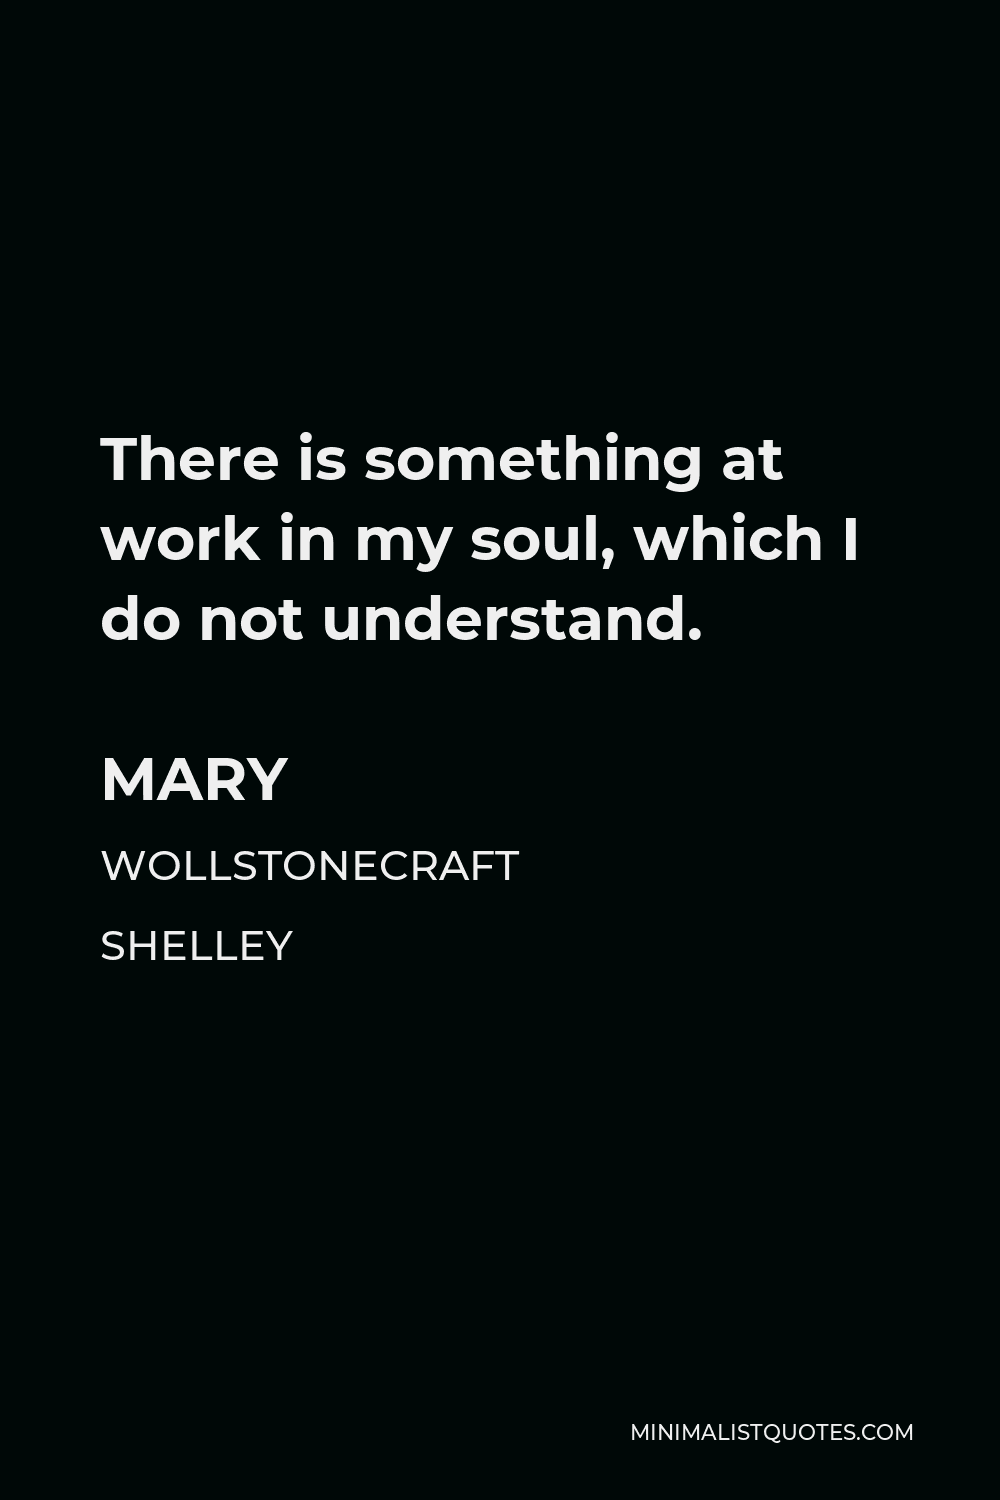 Mary Wollstonecraft Shelley Quote - There is something at work in my soul, which I do not understand.